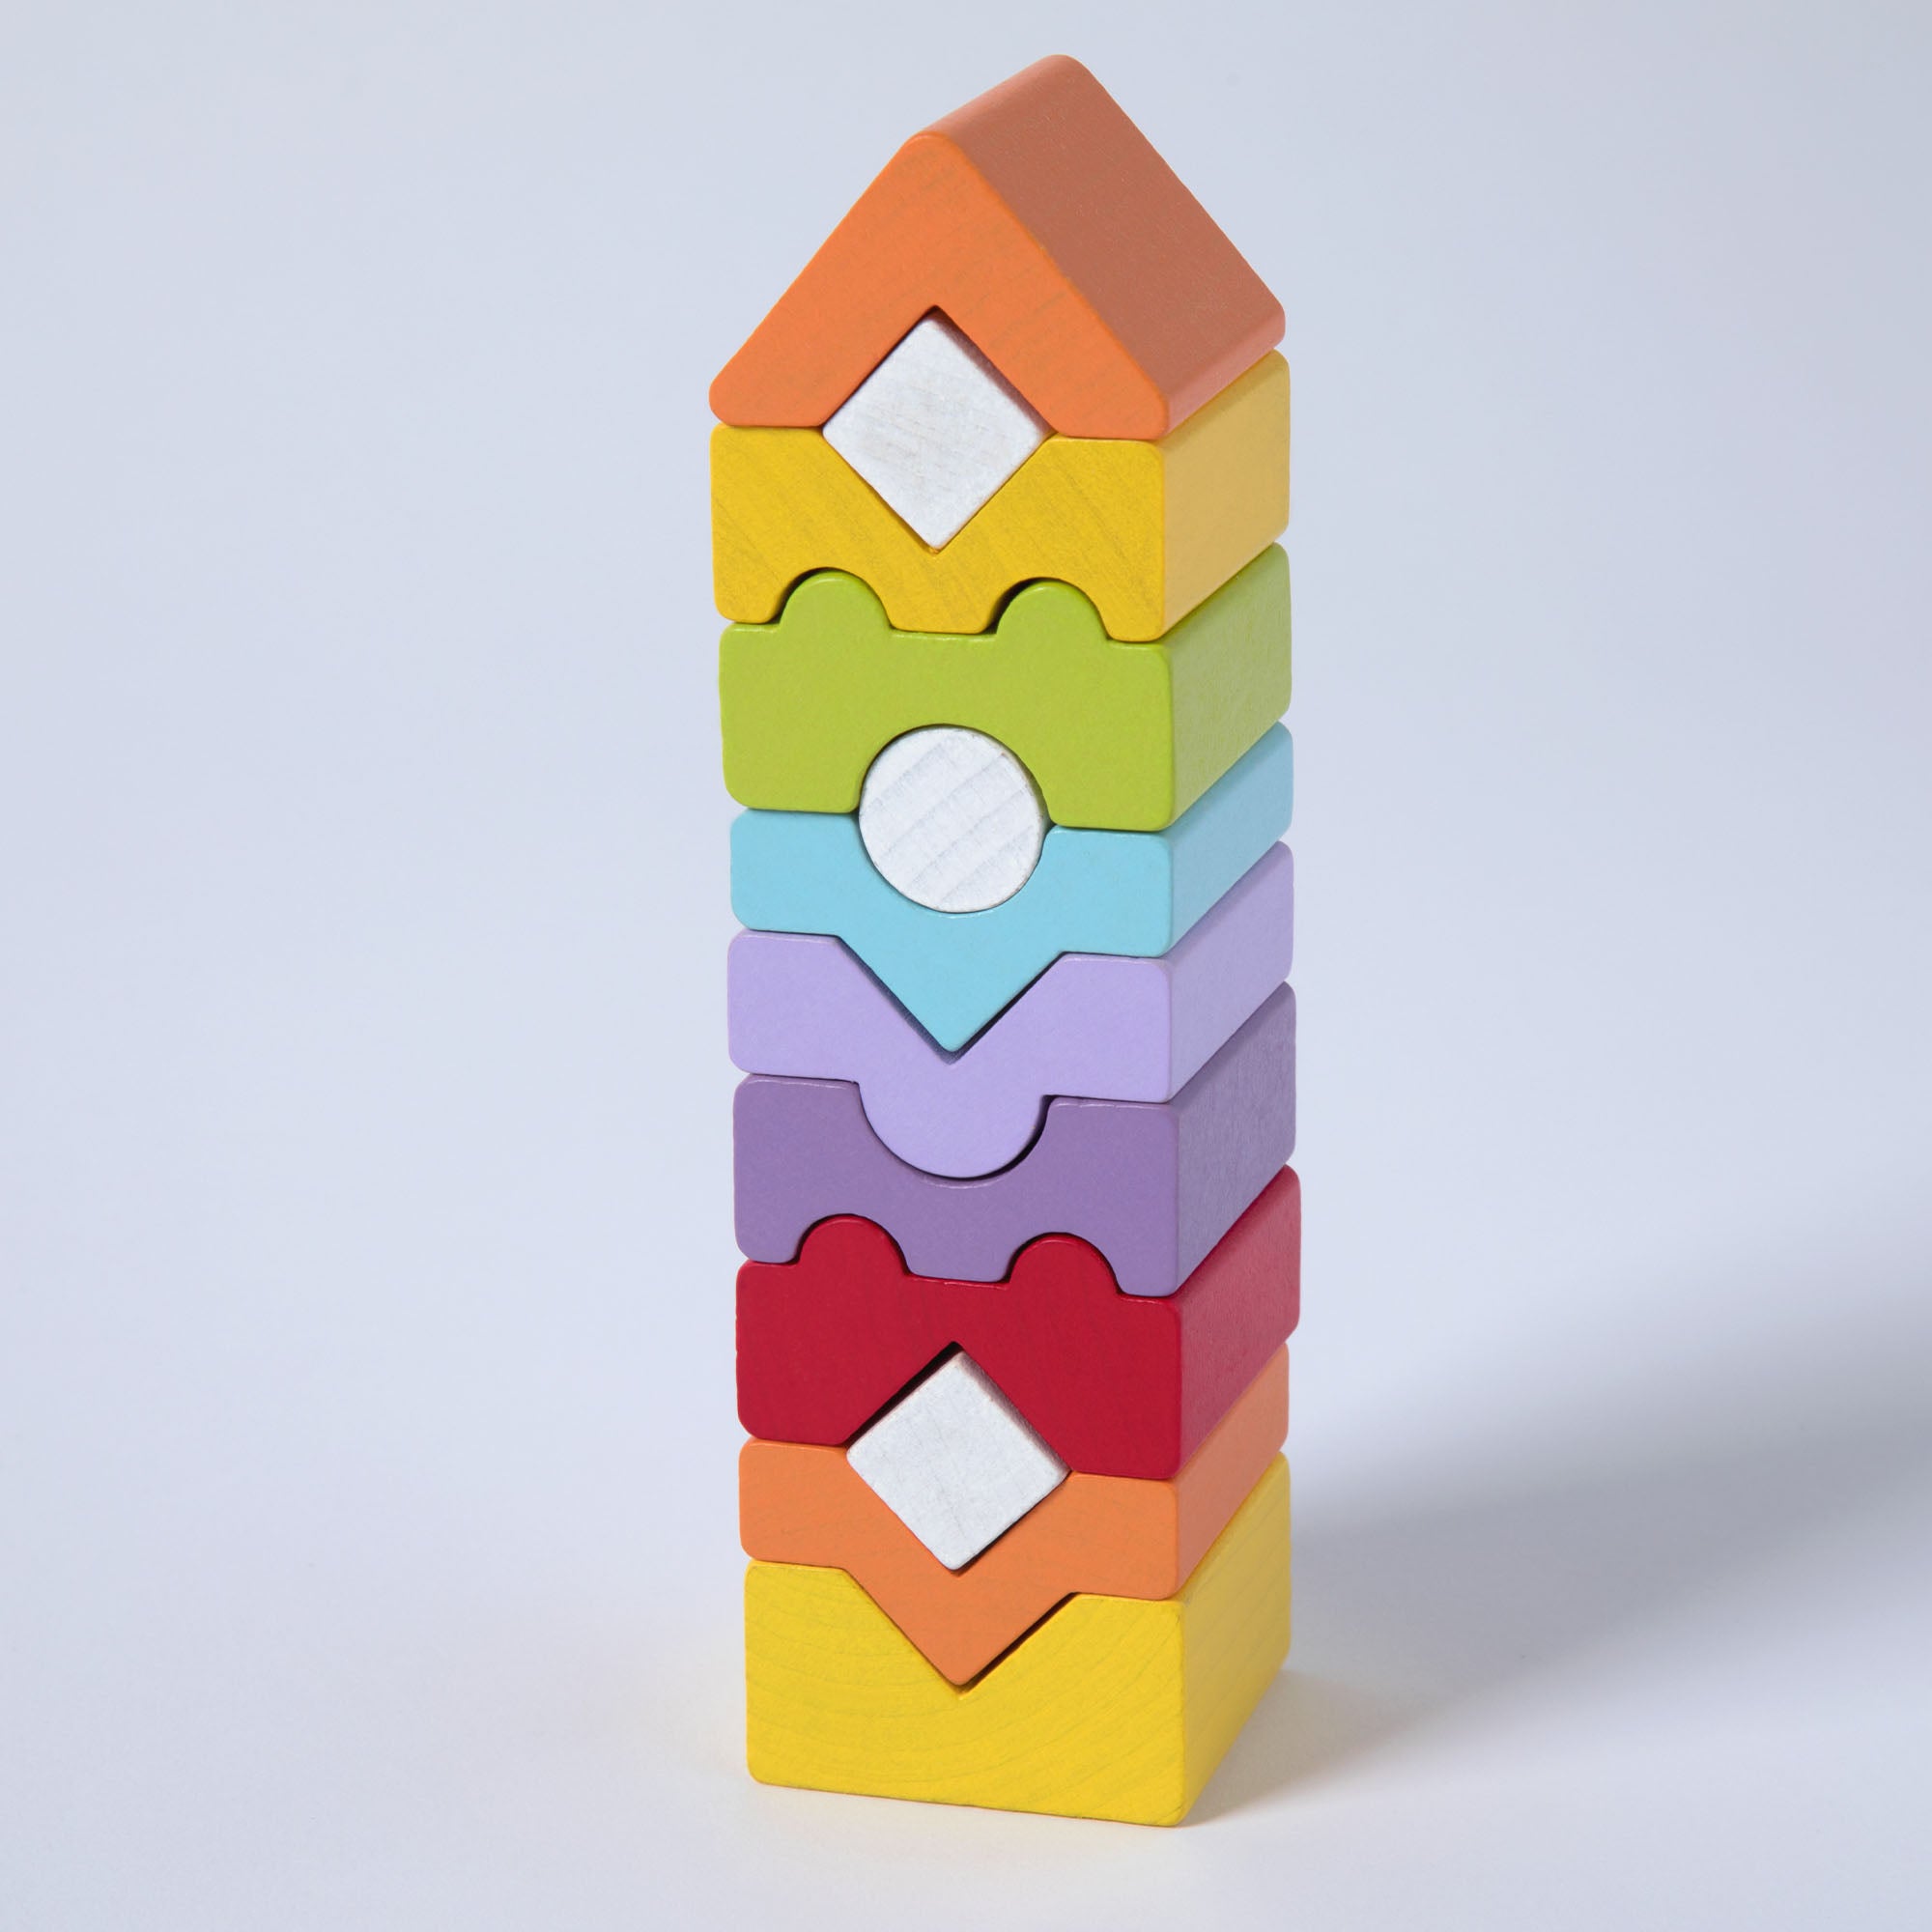 Made In Ukraine Wooden Tower Stacking Puzzle - Buy 1 Give 1